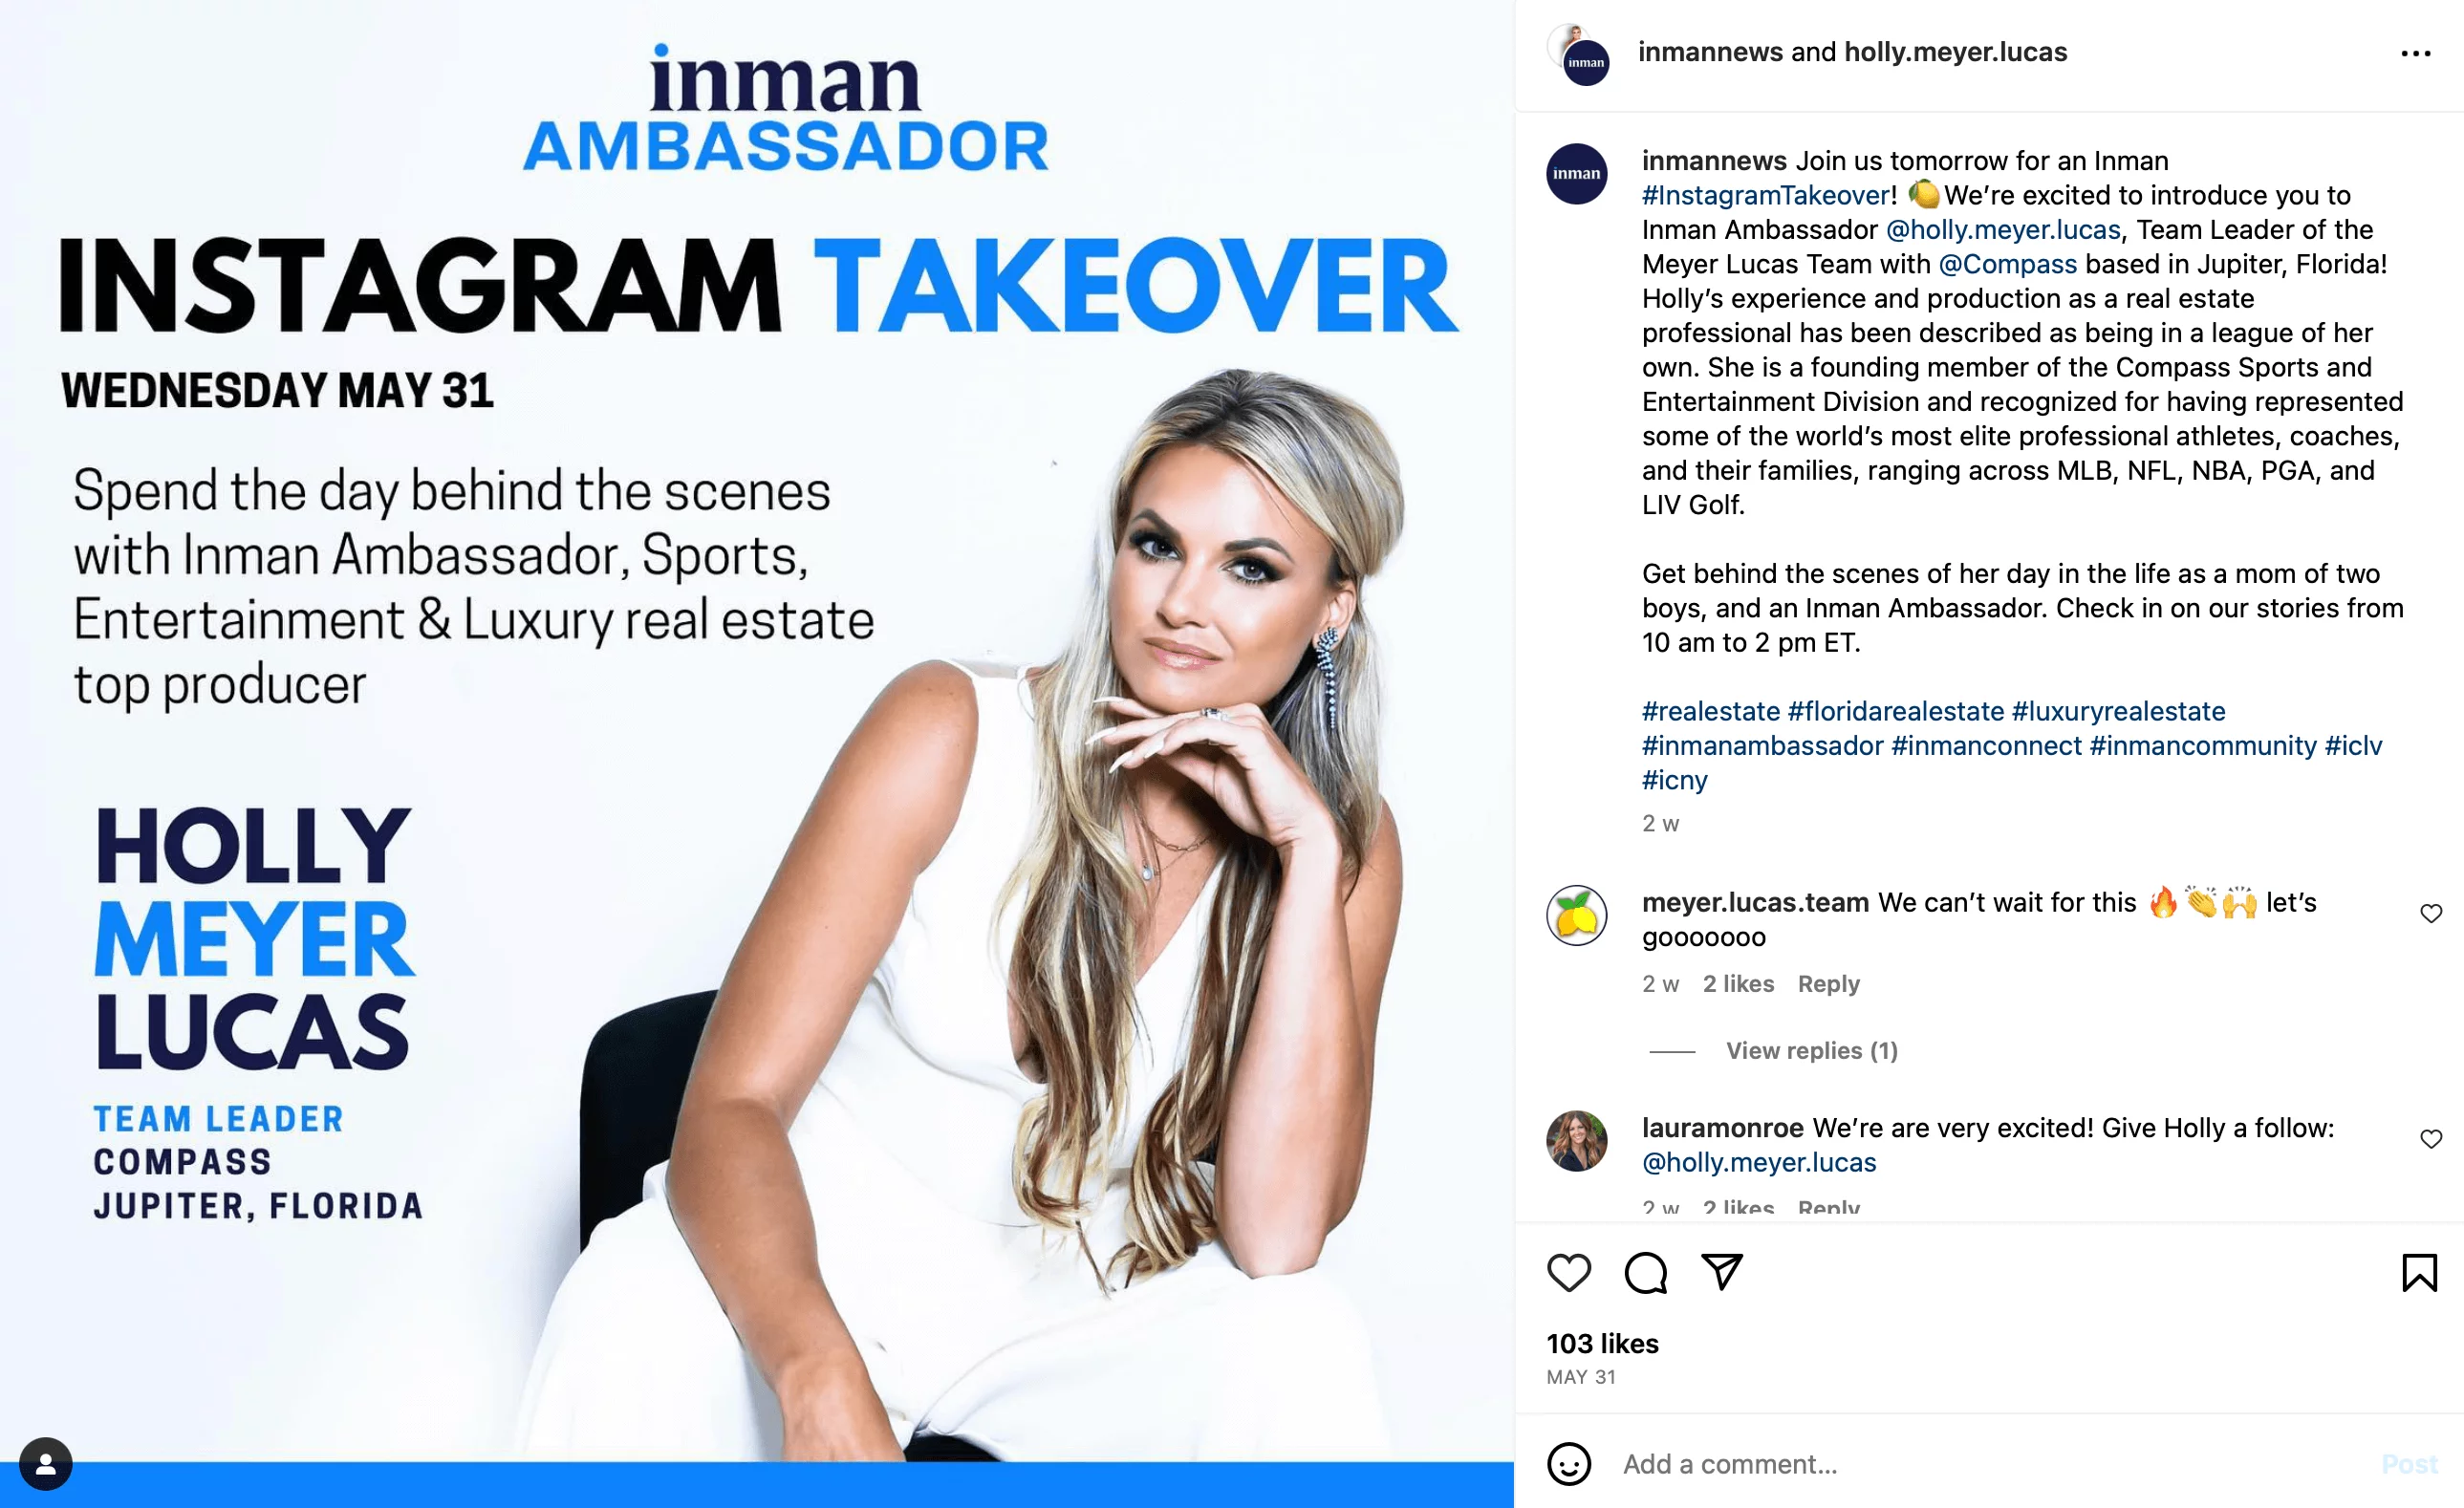 Instagram post announcing the takeover of the @inmannews account by @holly.meyer.lucas on Wednesday, May 31